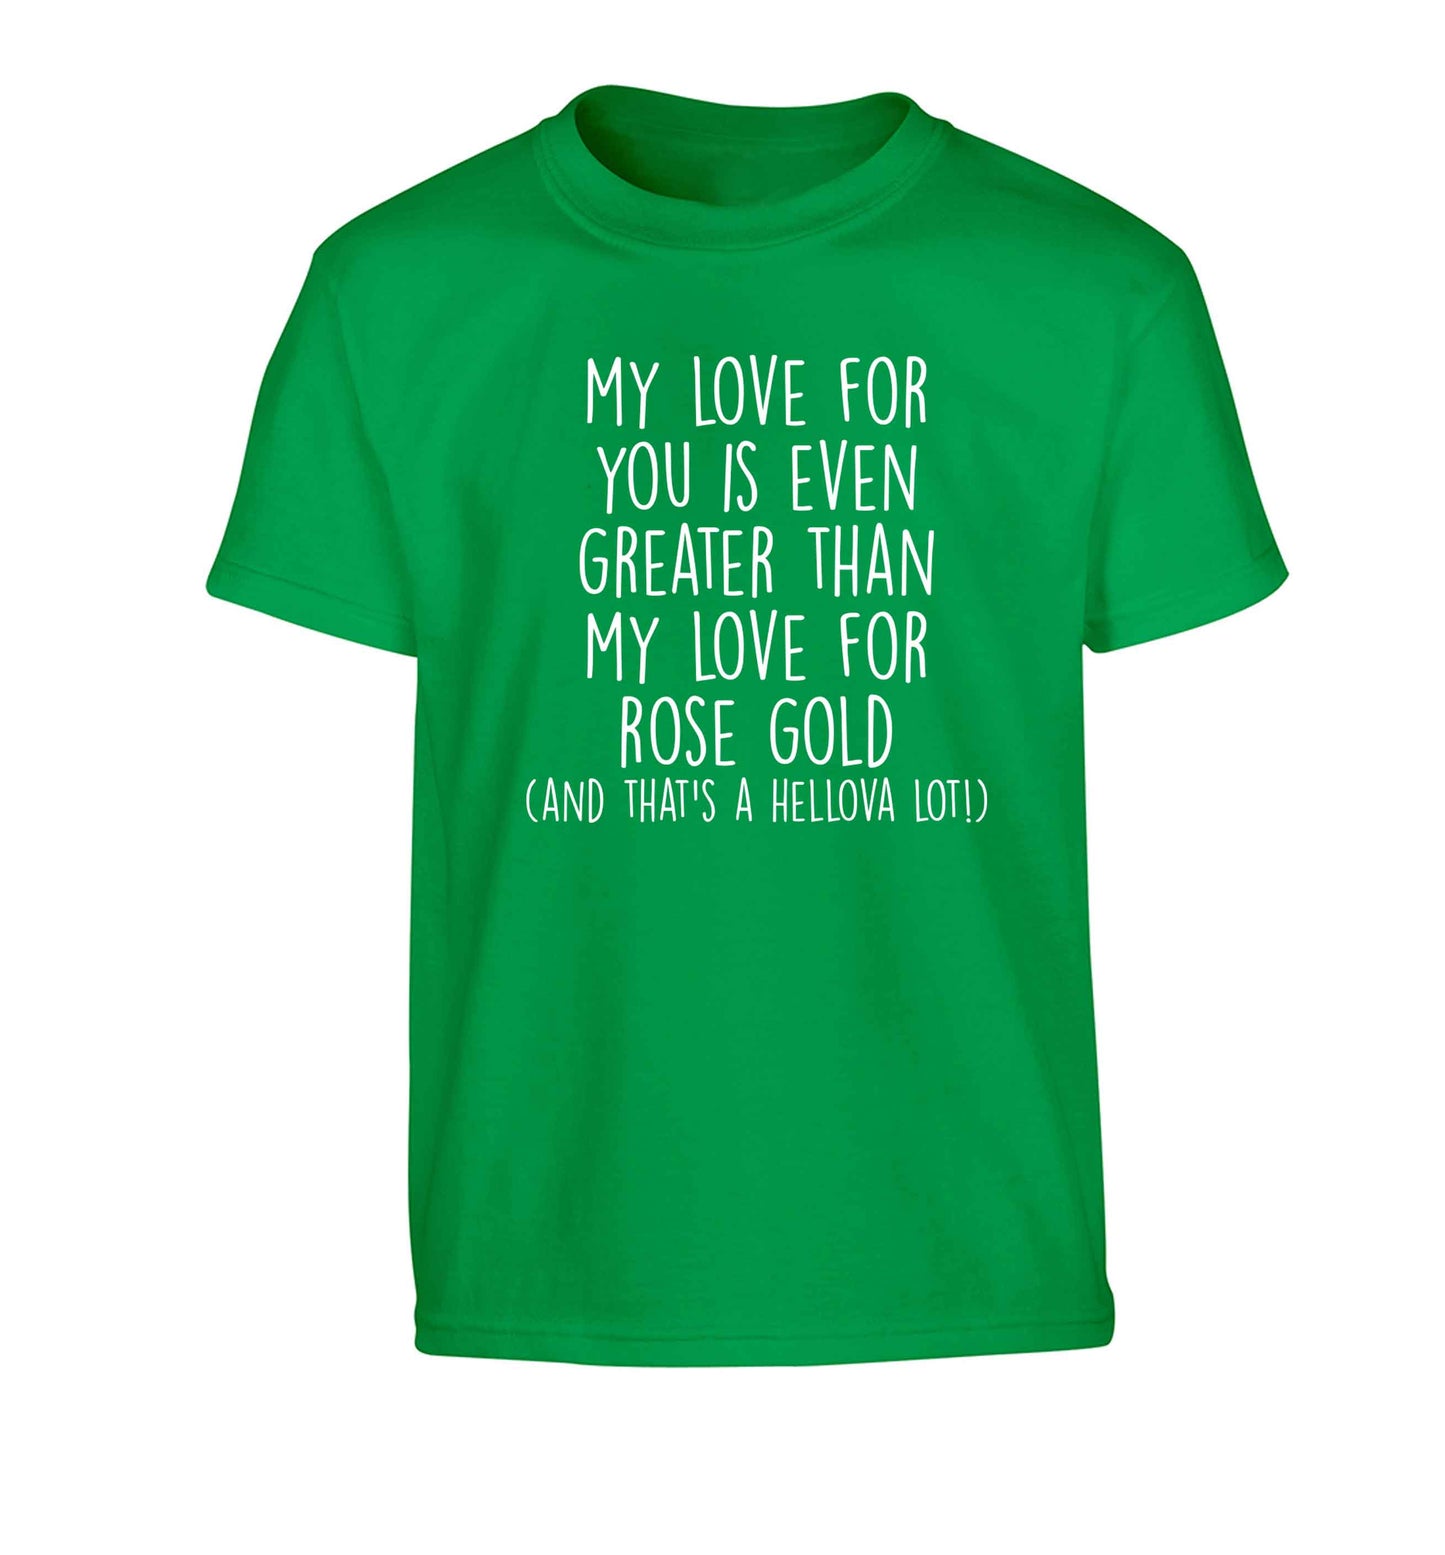 My love for you is even greater than my love for rose gold (and that's a hellova lot) Children's green Tshirt 12-13 Years